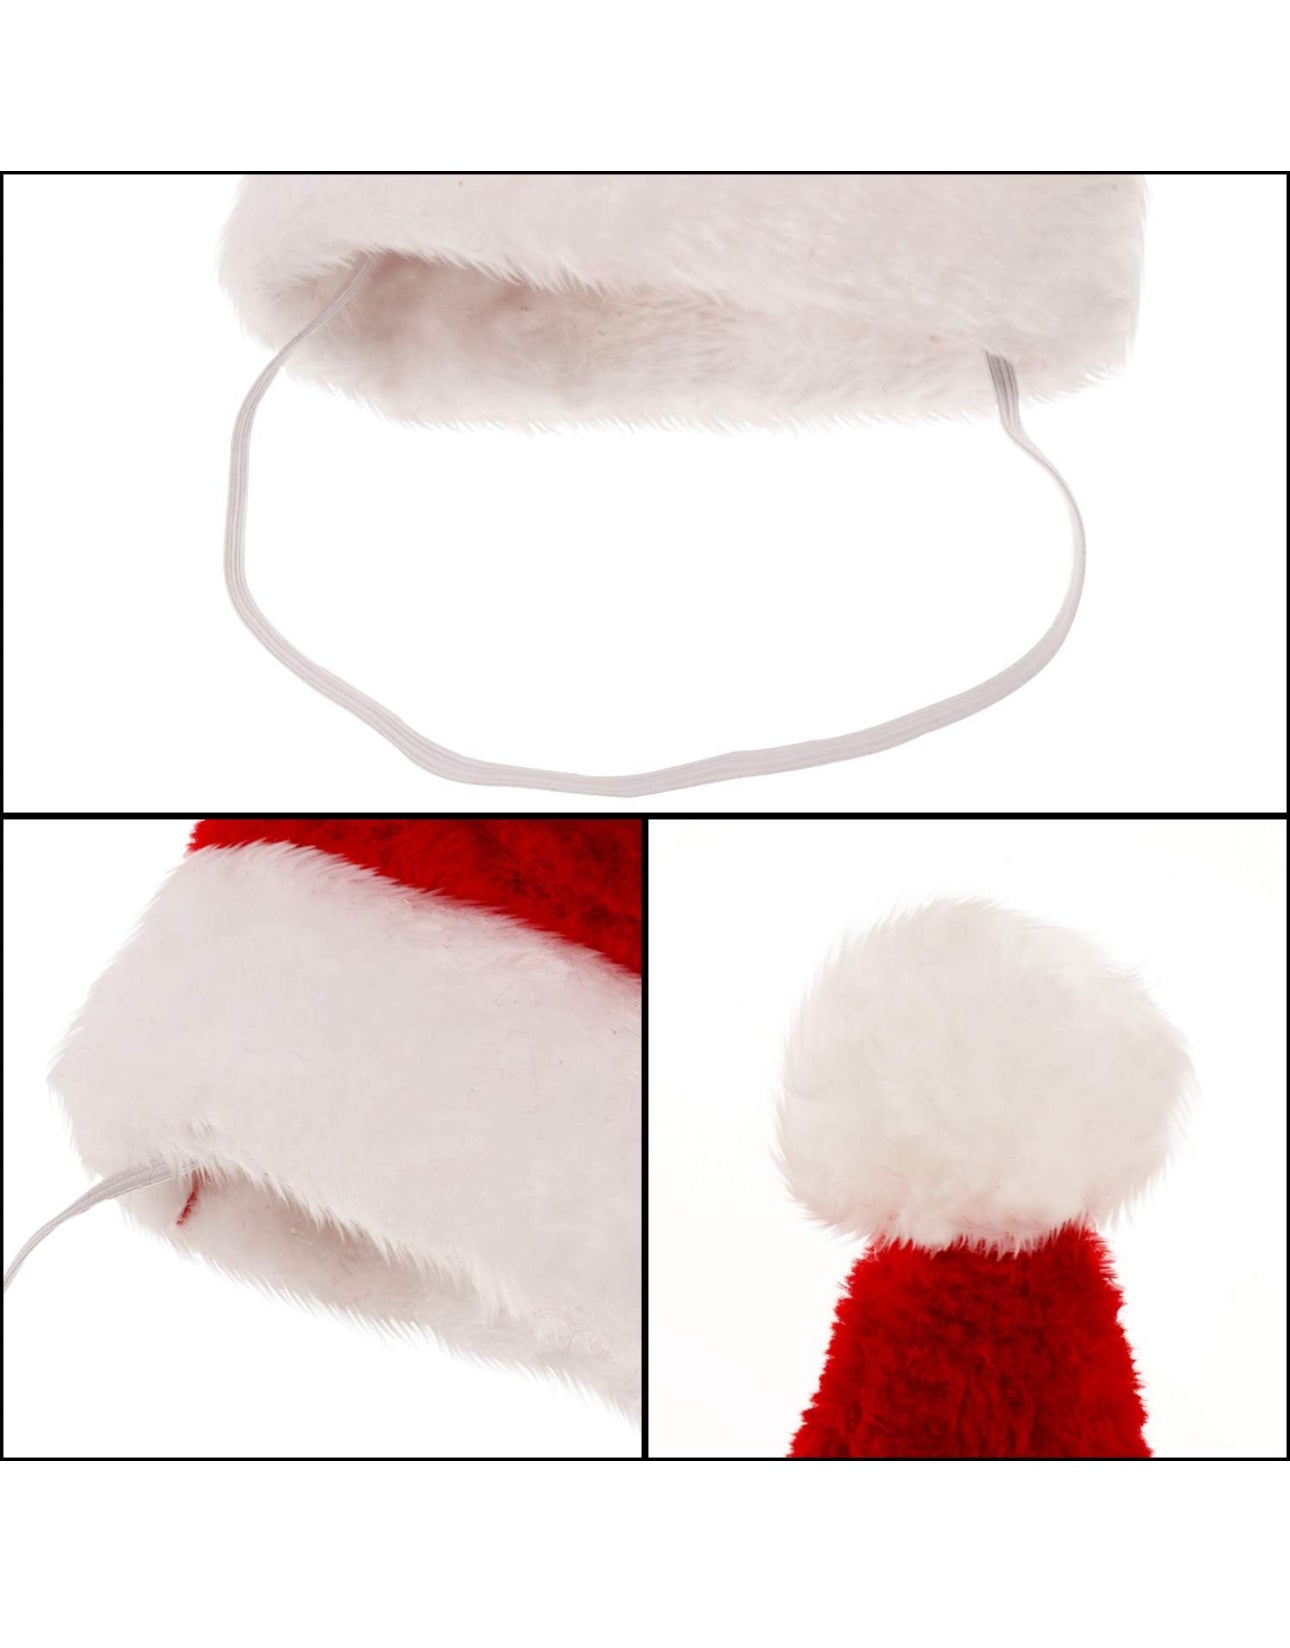 4 Pieces Dog Santa Hat Christmas Pet Hats Pet Costumes for Dogs Cats Christmas Supplies